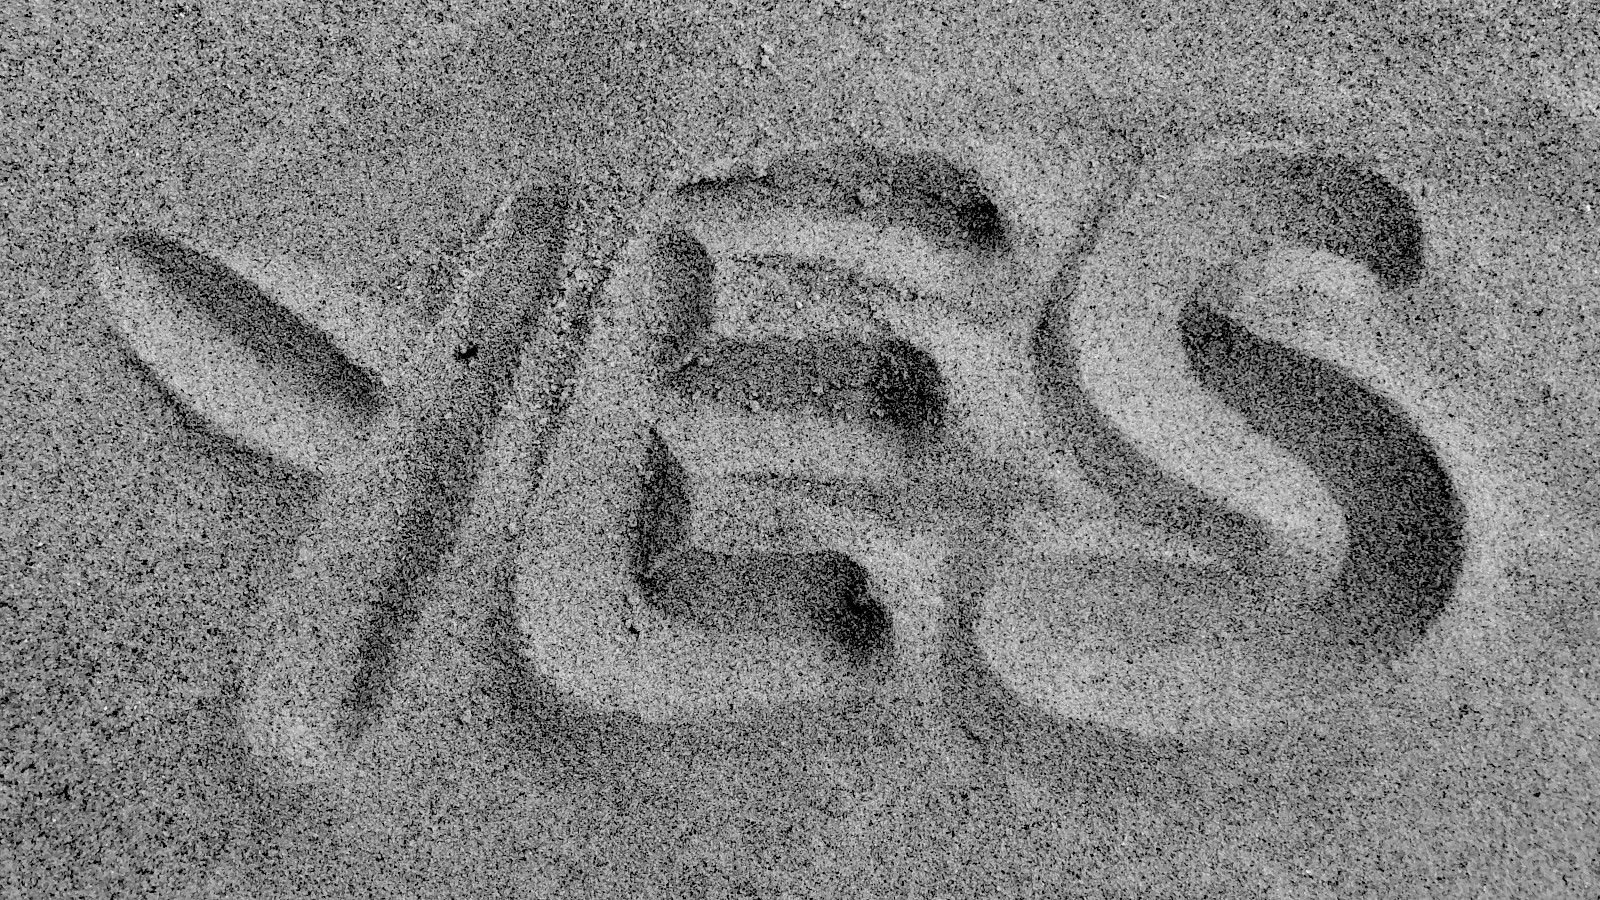 Black and white image of the word 'yes' drawn in sand